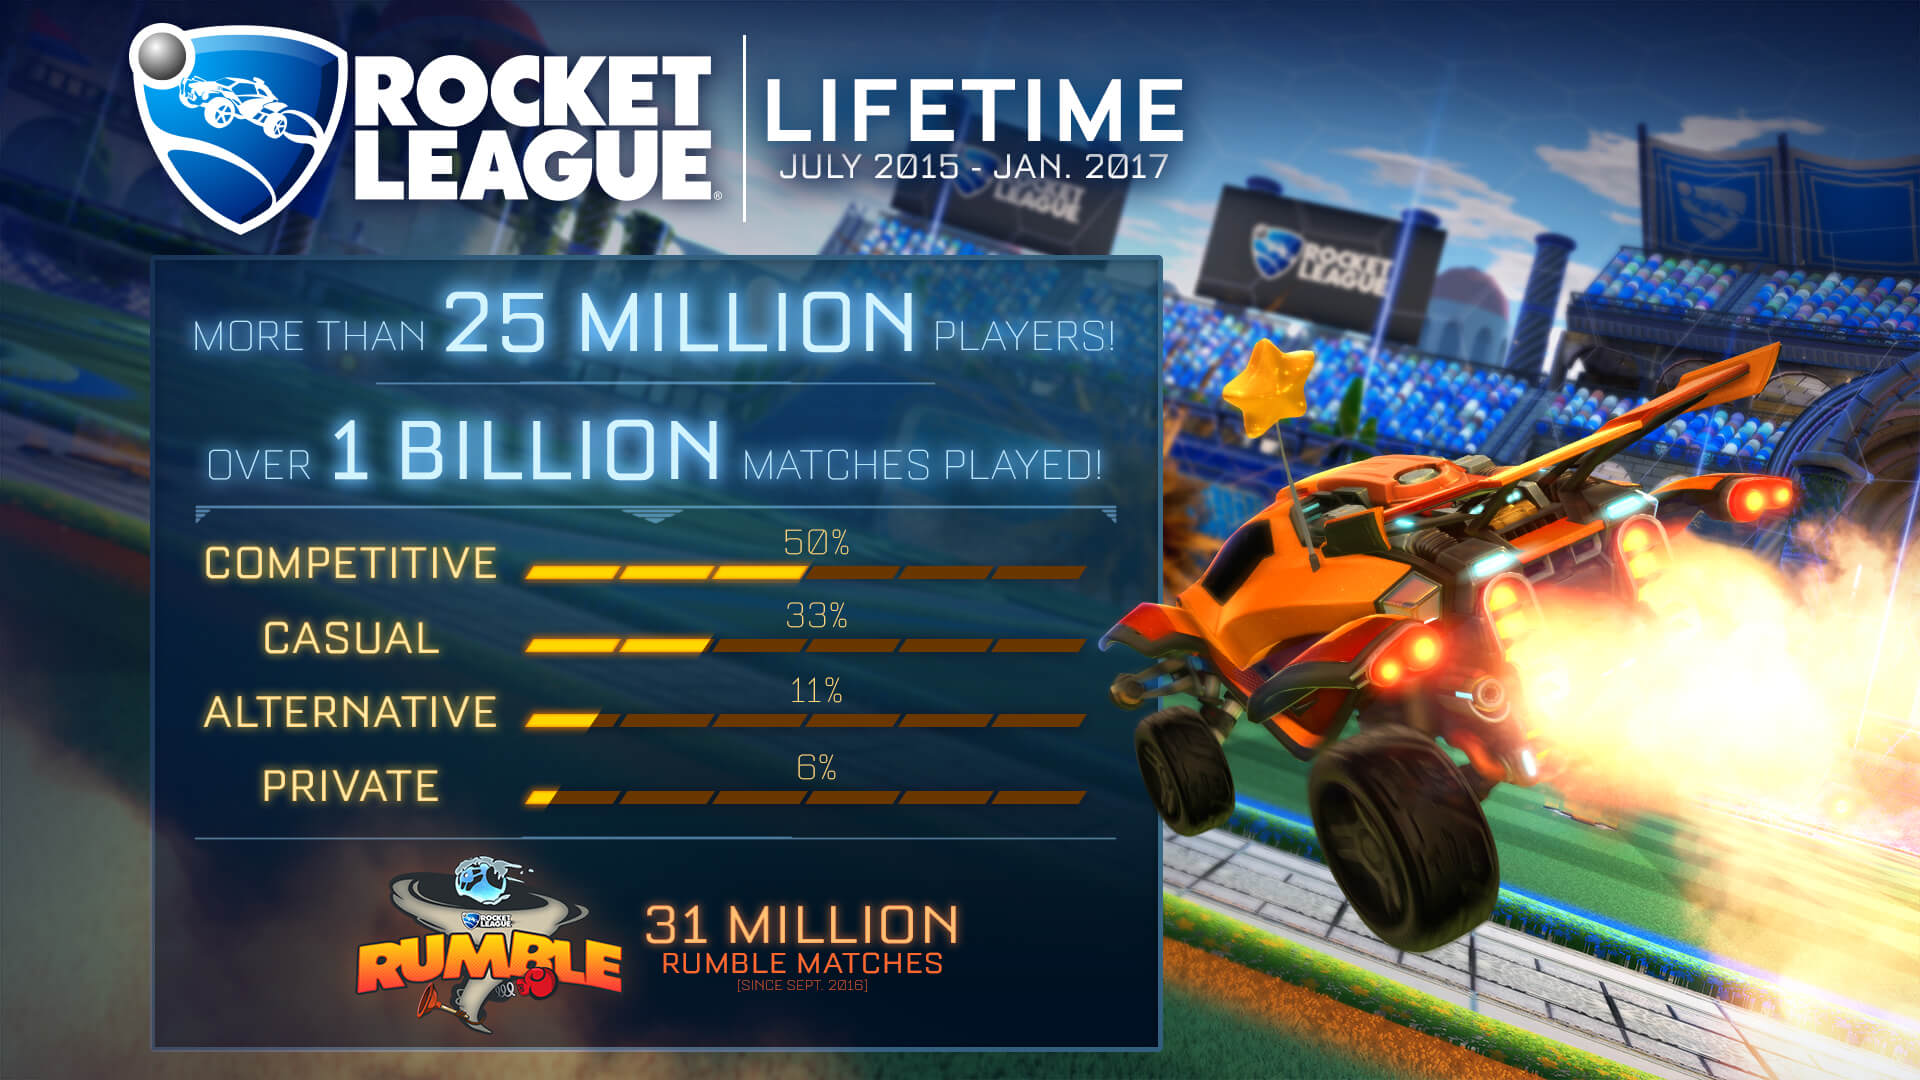 Y'all have played a lot of Rocket League.